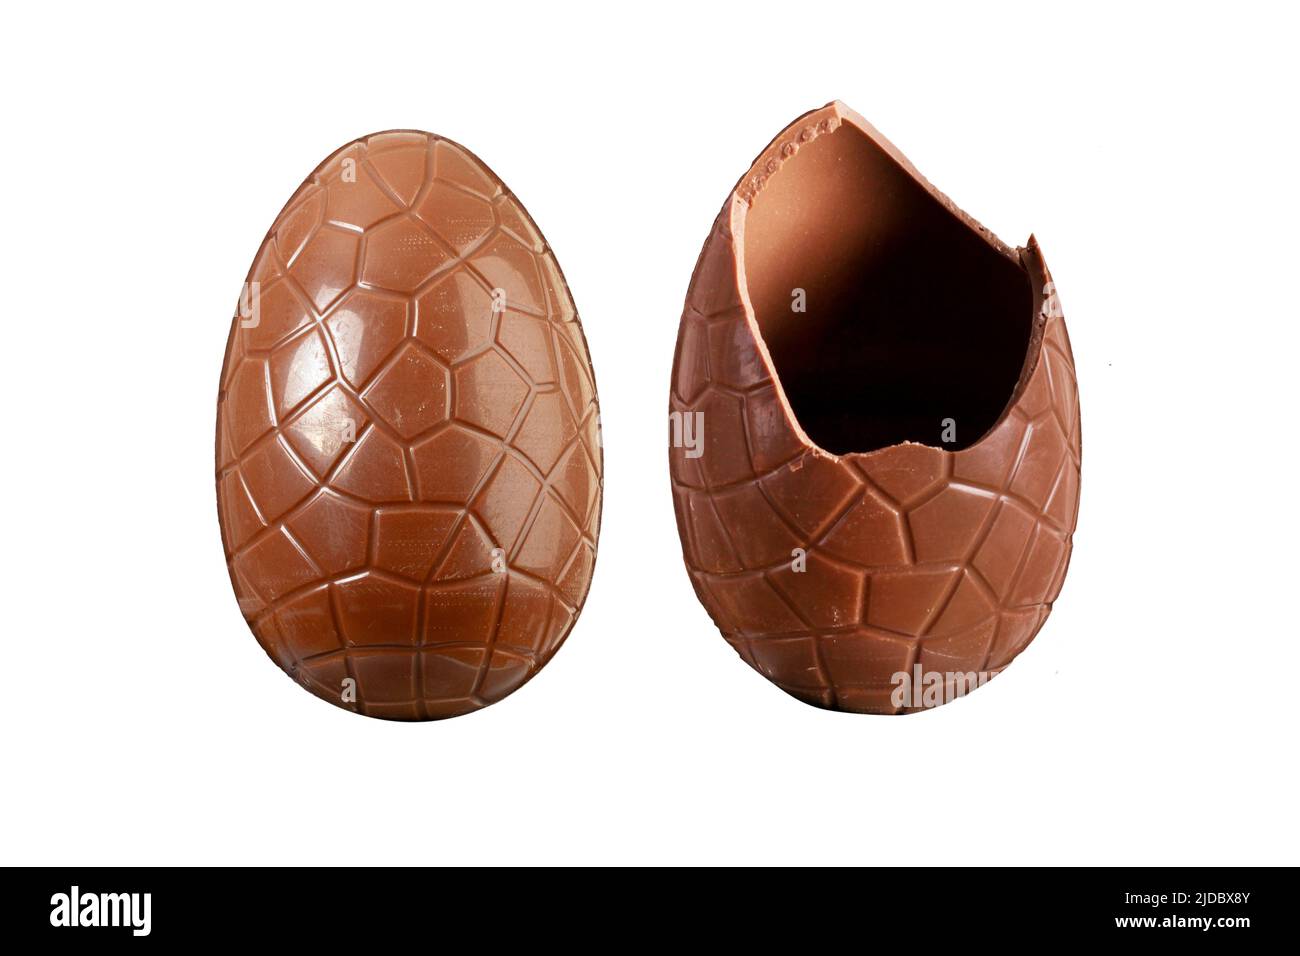 Chocolate Easter egg whole and broken isolated on a white background Stock Photo